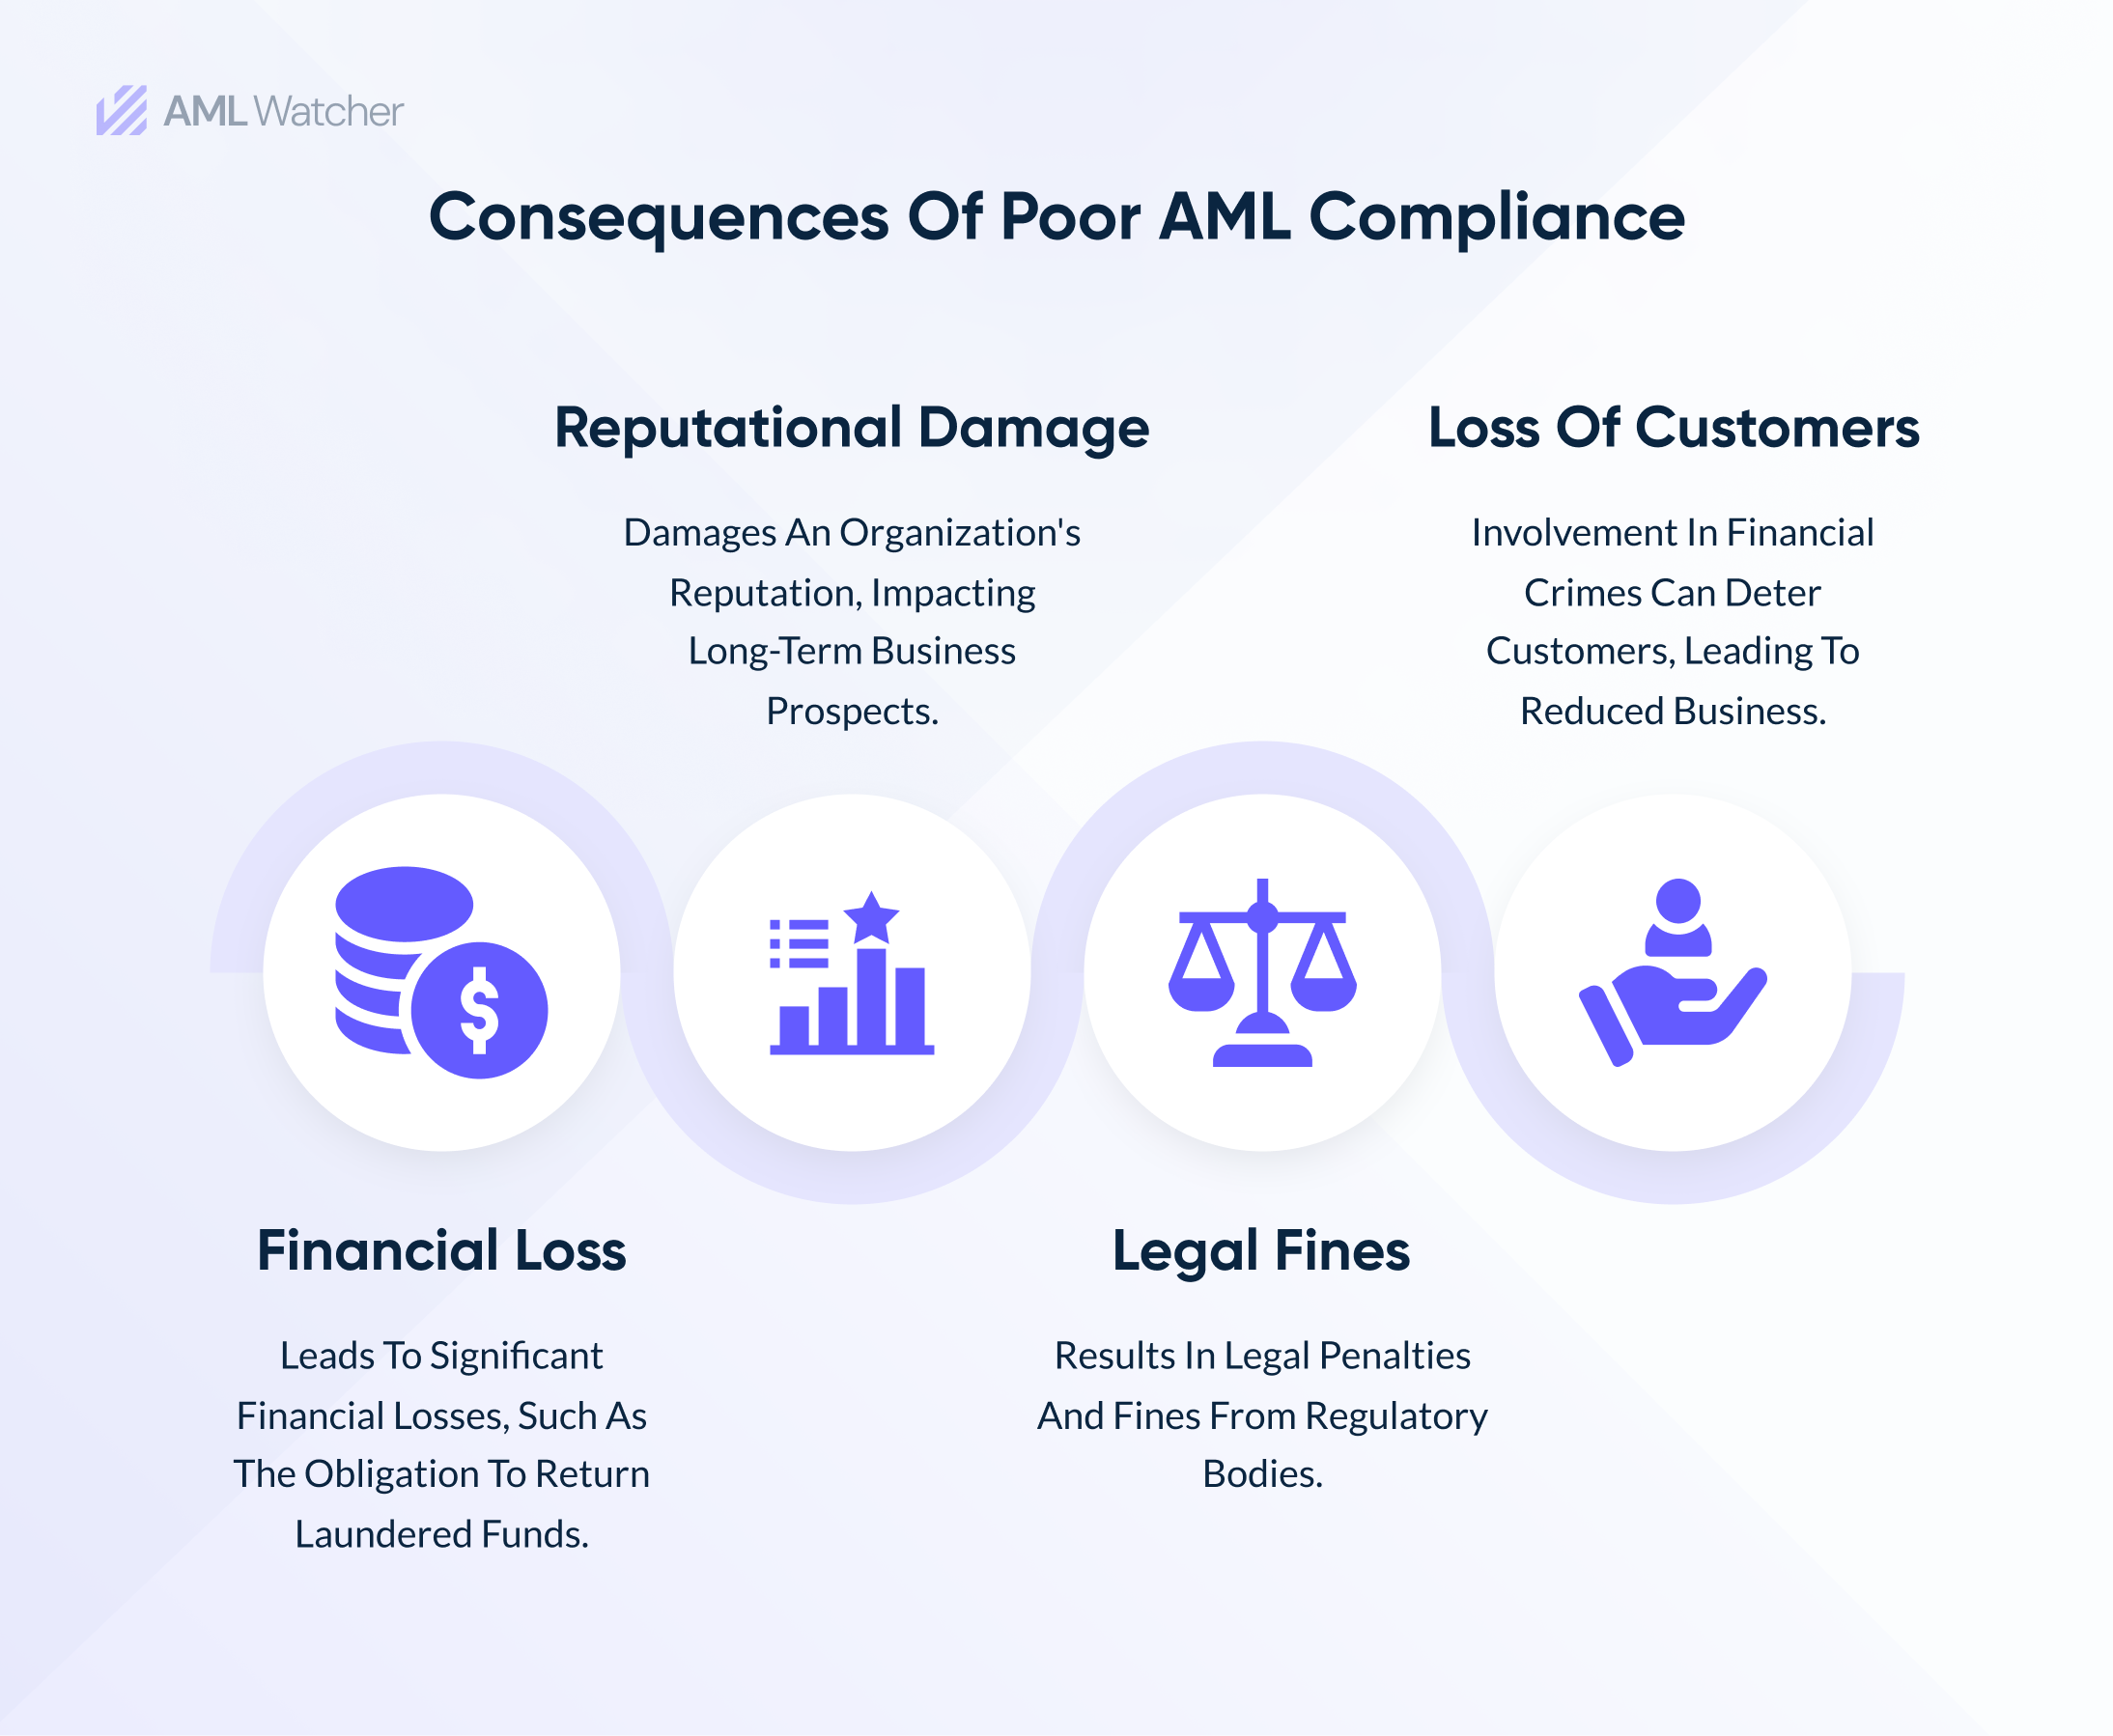 This image shows the Consequences of Poor AML Compliance 